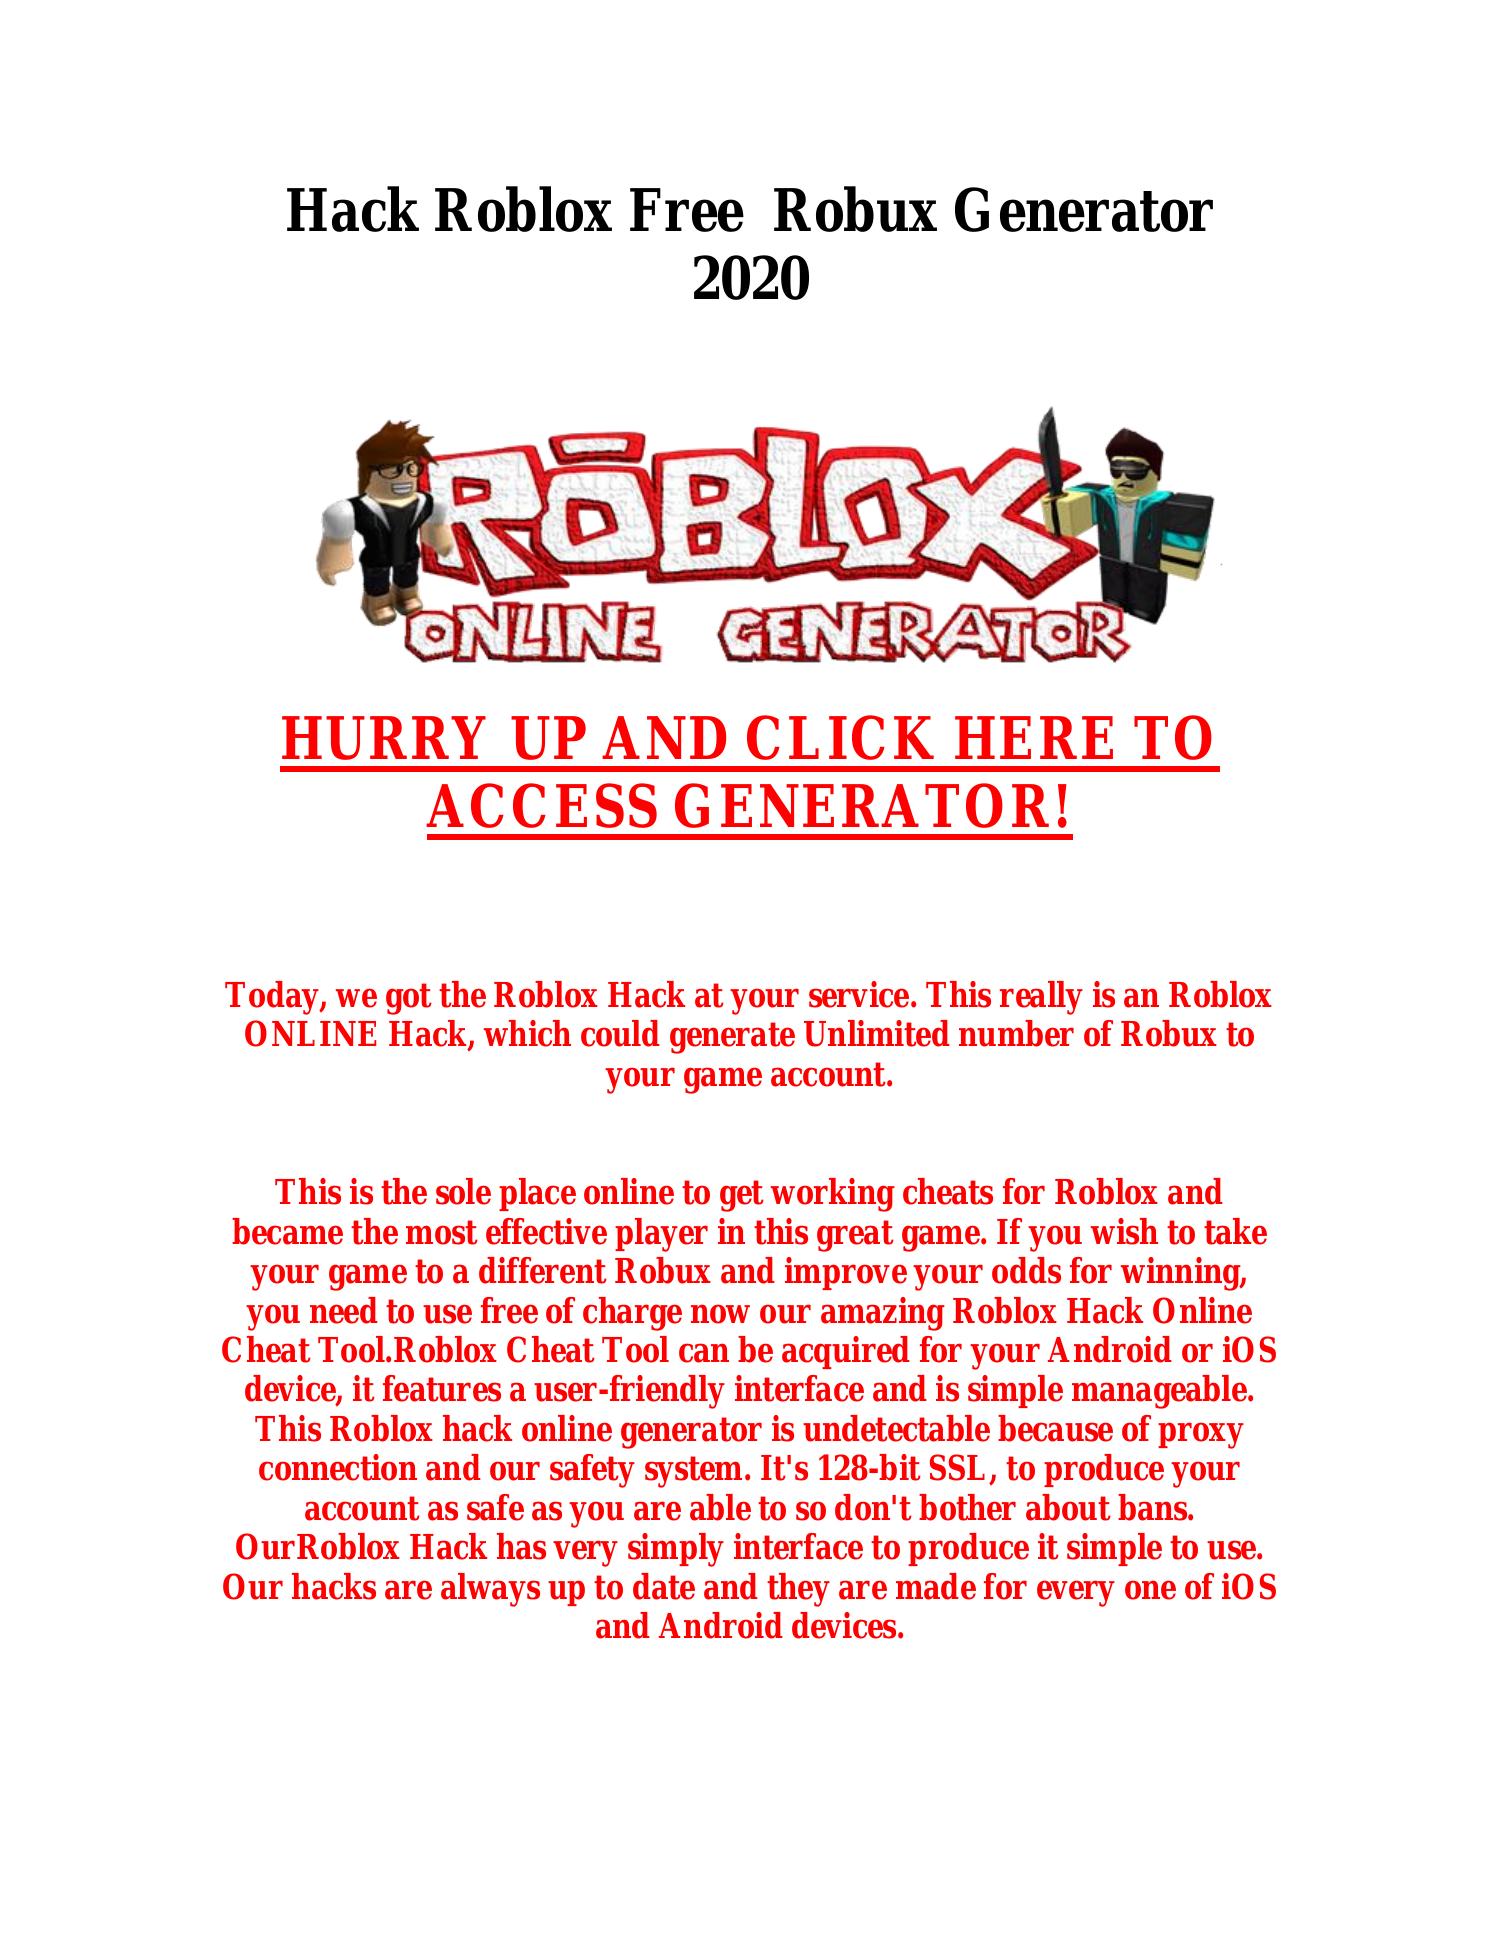 How To Hack Roblox Free Robux